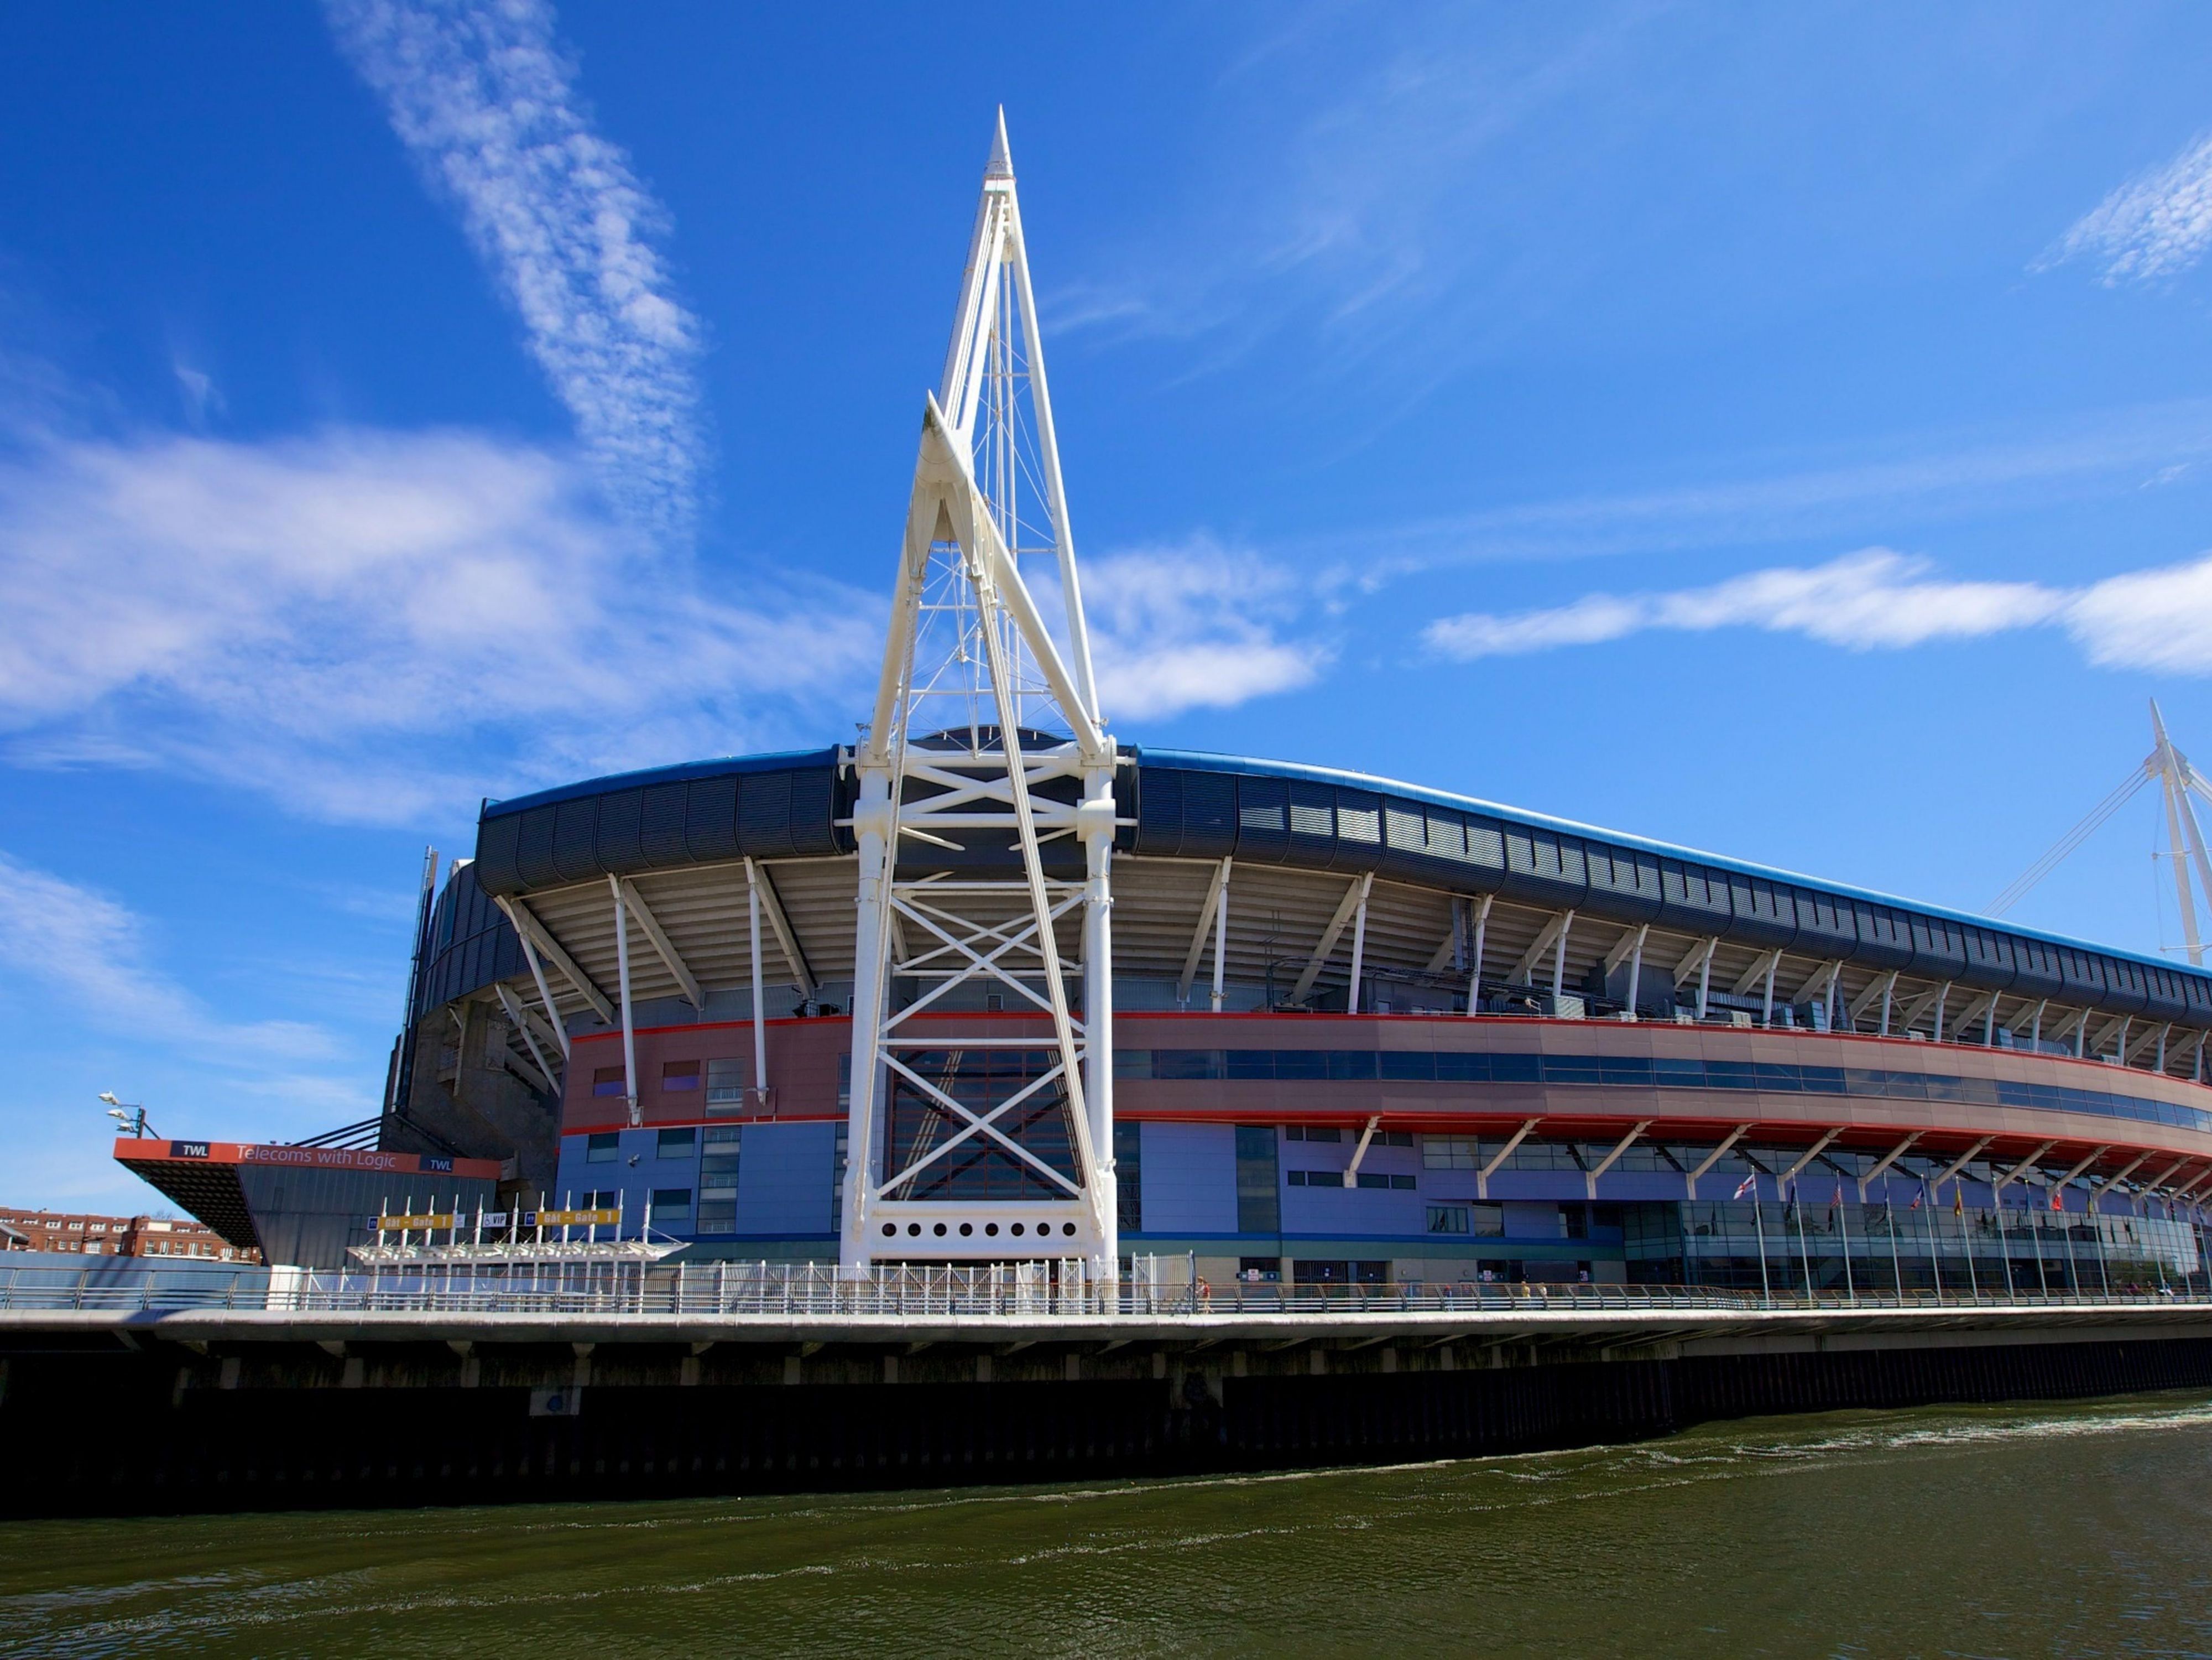 Our excellent location provides a great base to explore all the city has to offer from shopping at St David’s Dewi Sant or visiting the castle, to taking a tour at the Principality Stadium or enjoying the waterfront quay, easily reached by Waterbus from the jetty adjacent to the hotel. 